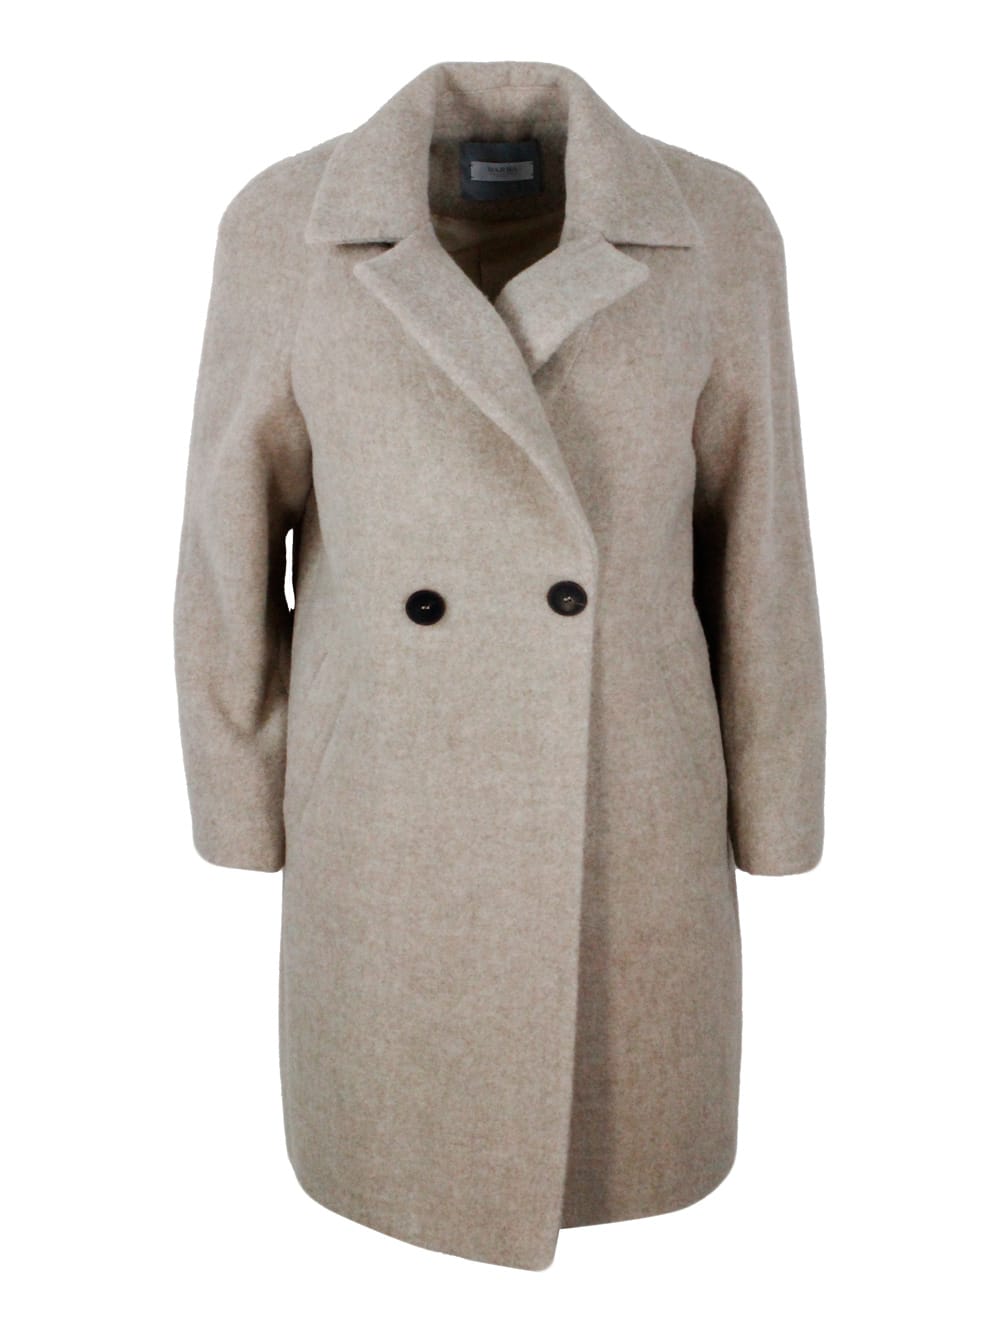 Double-breasted Coat Made Of Soft And Precious Alpaca And Wool With Side Pockets And Button Closure